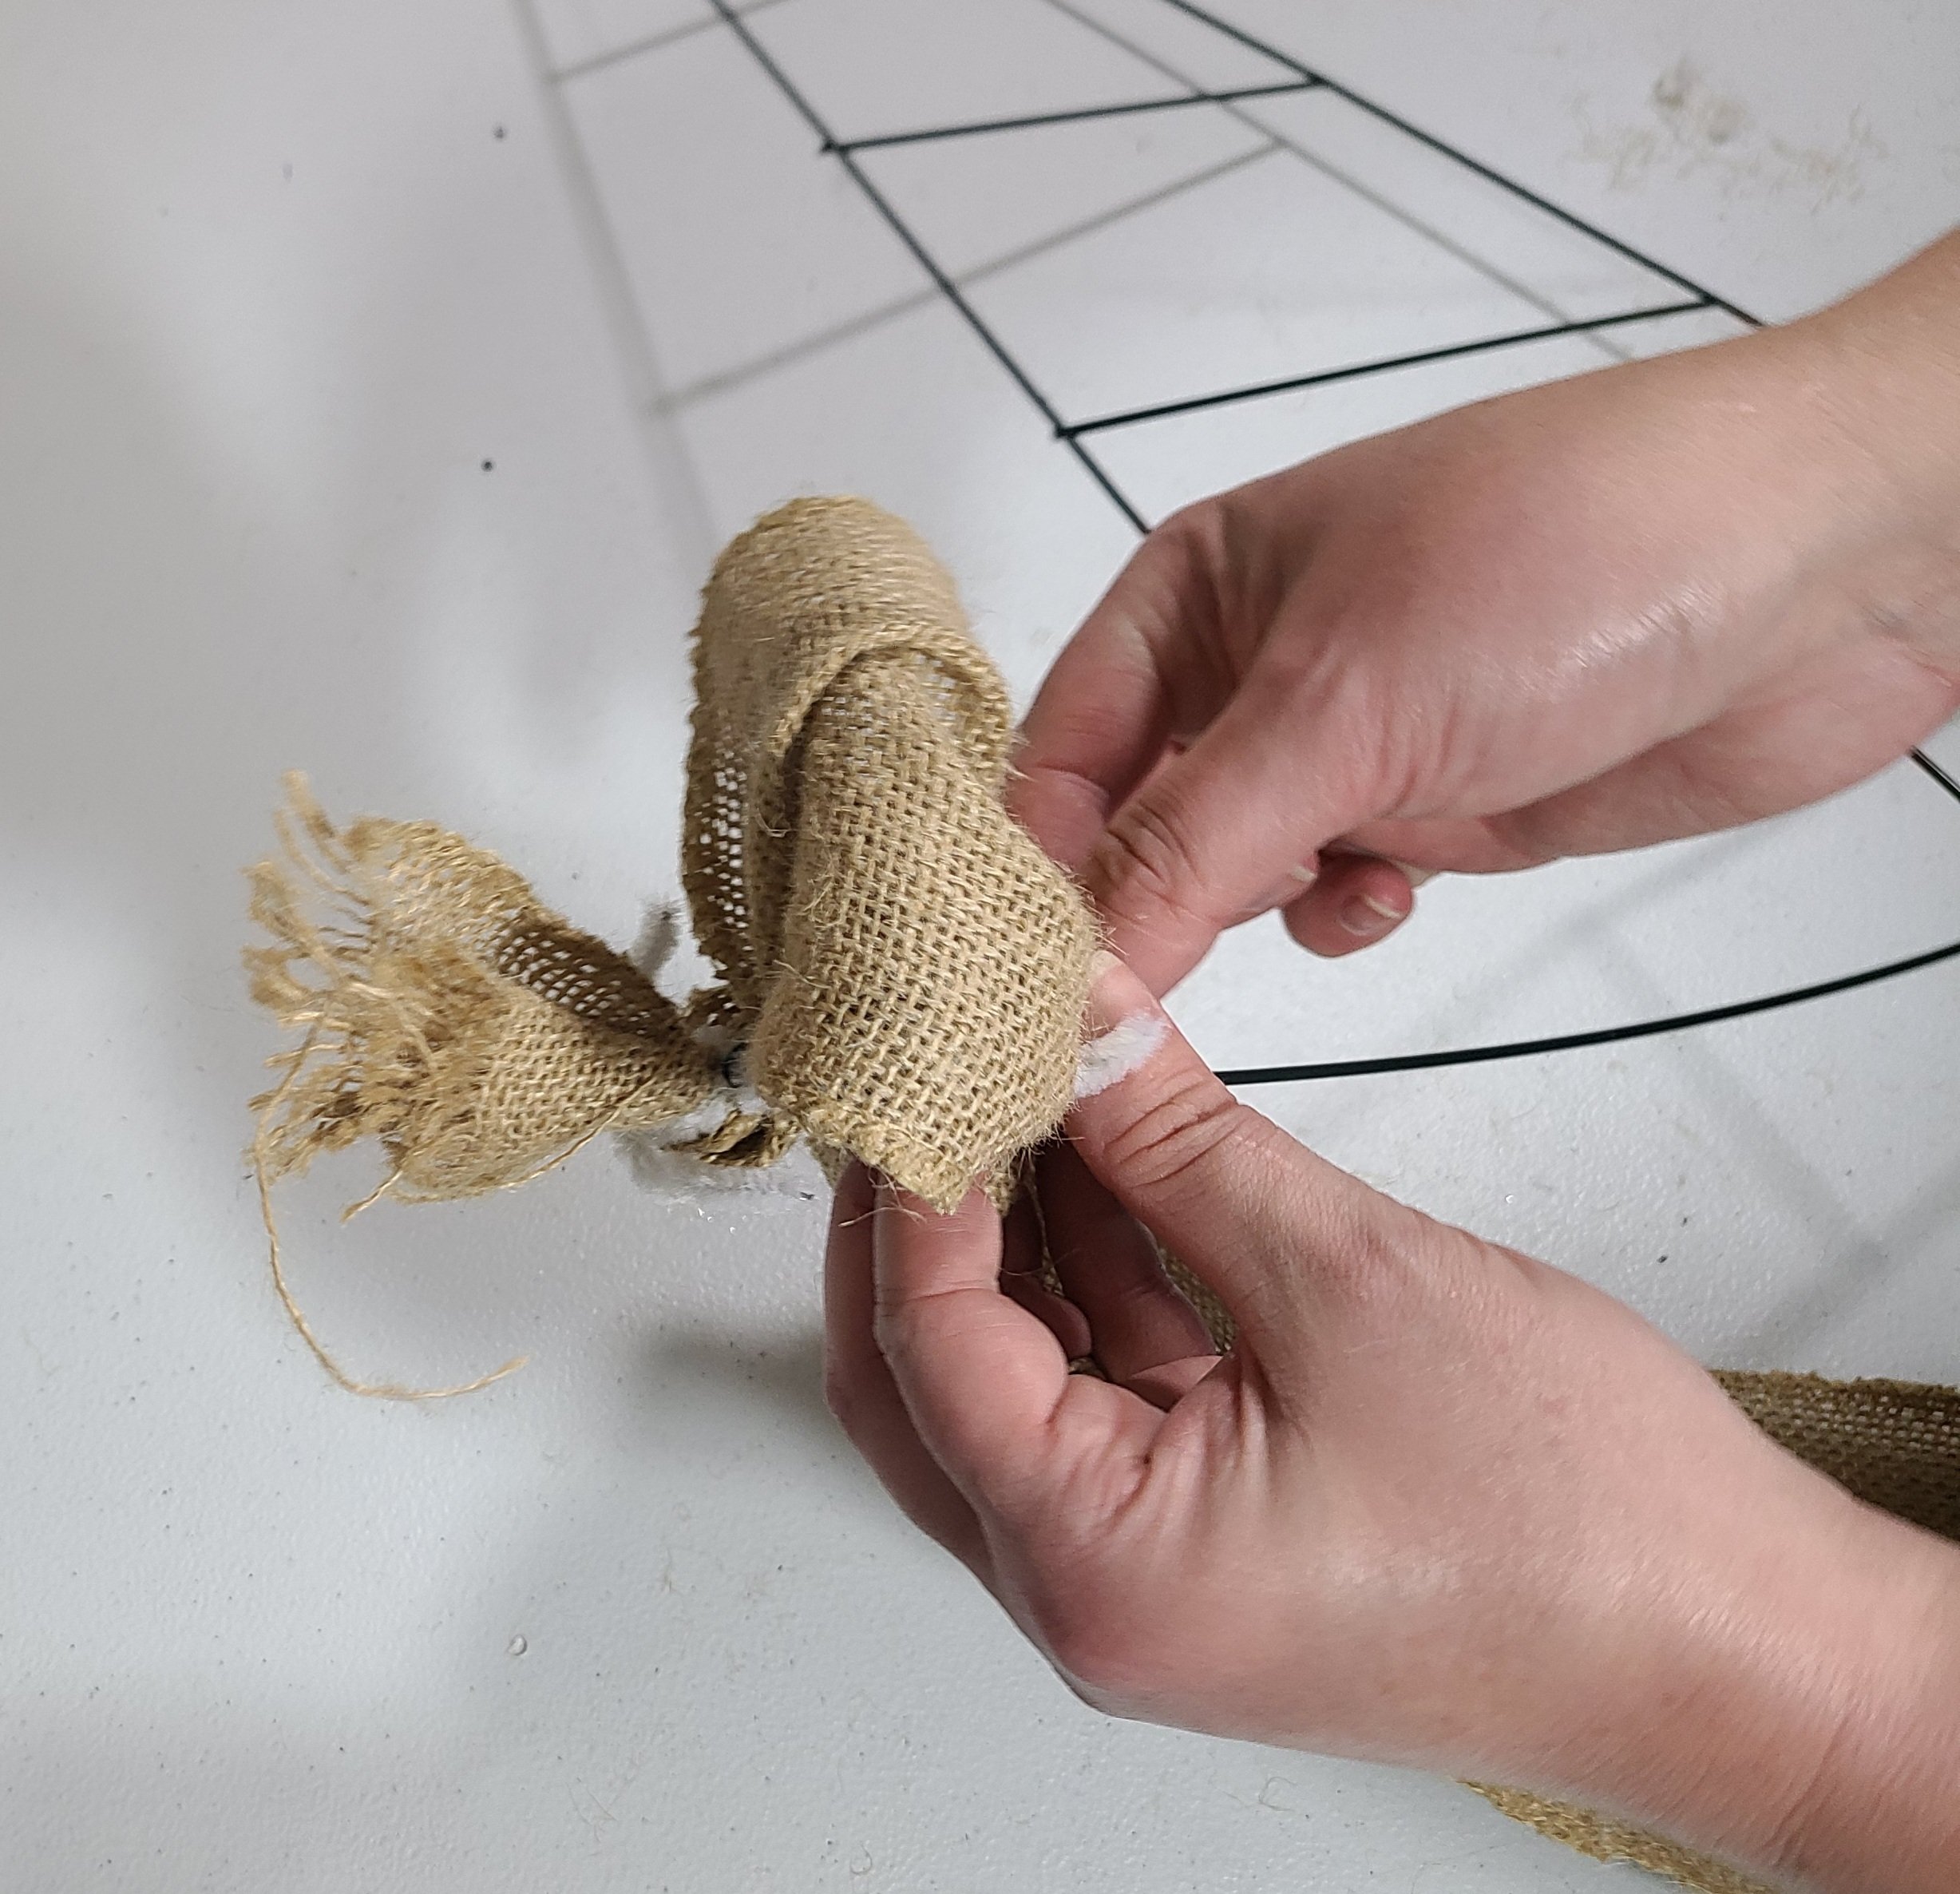 Attaching the burlap 6" from the start to the witch hat wreath to form the first "bubble."